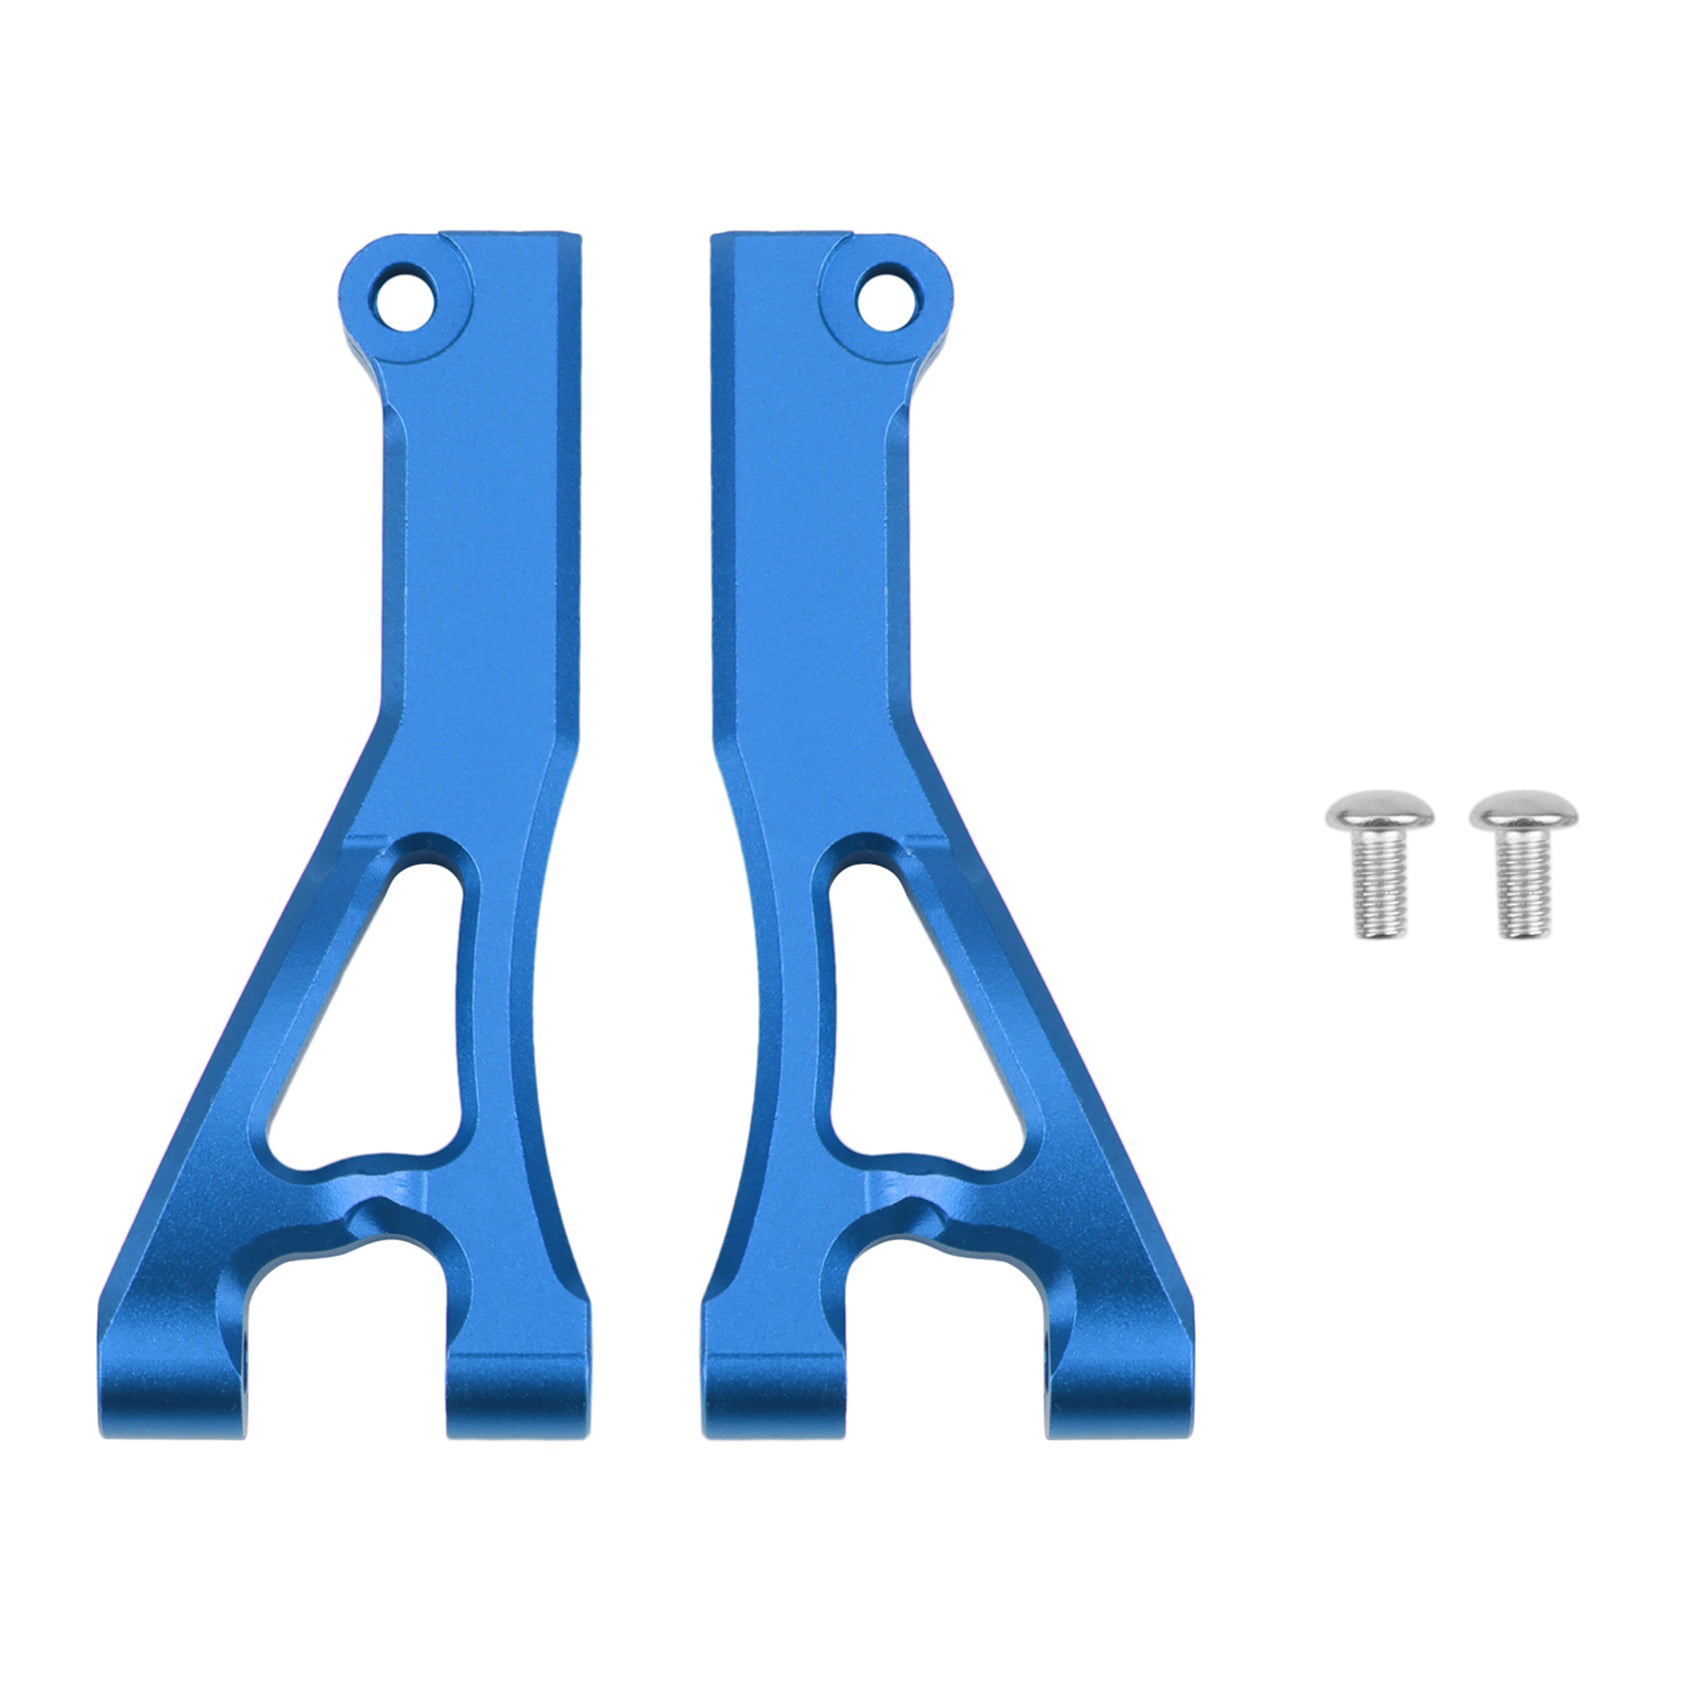 TYPHON 6S INFRACTION 6S 2x Aluminum Front Lower Arm for ARRMA 1/7 LIMITLESS